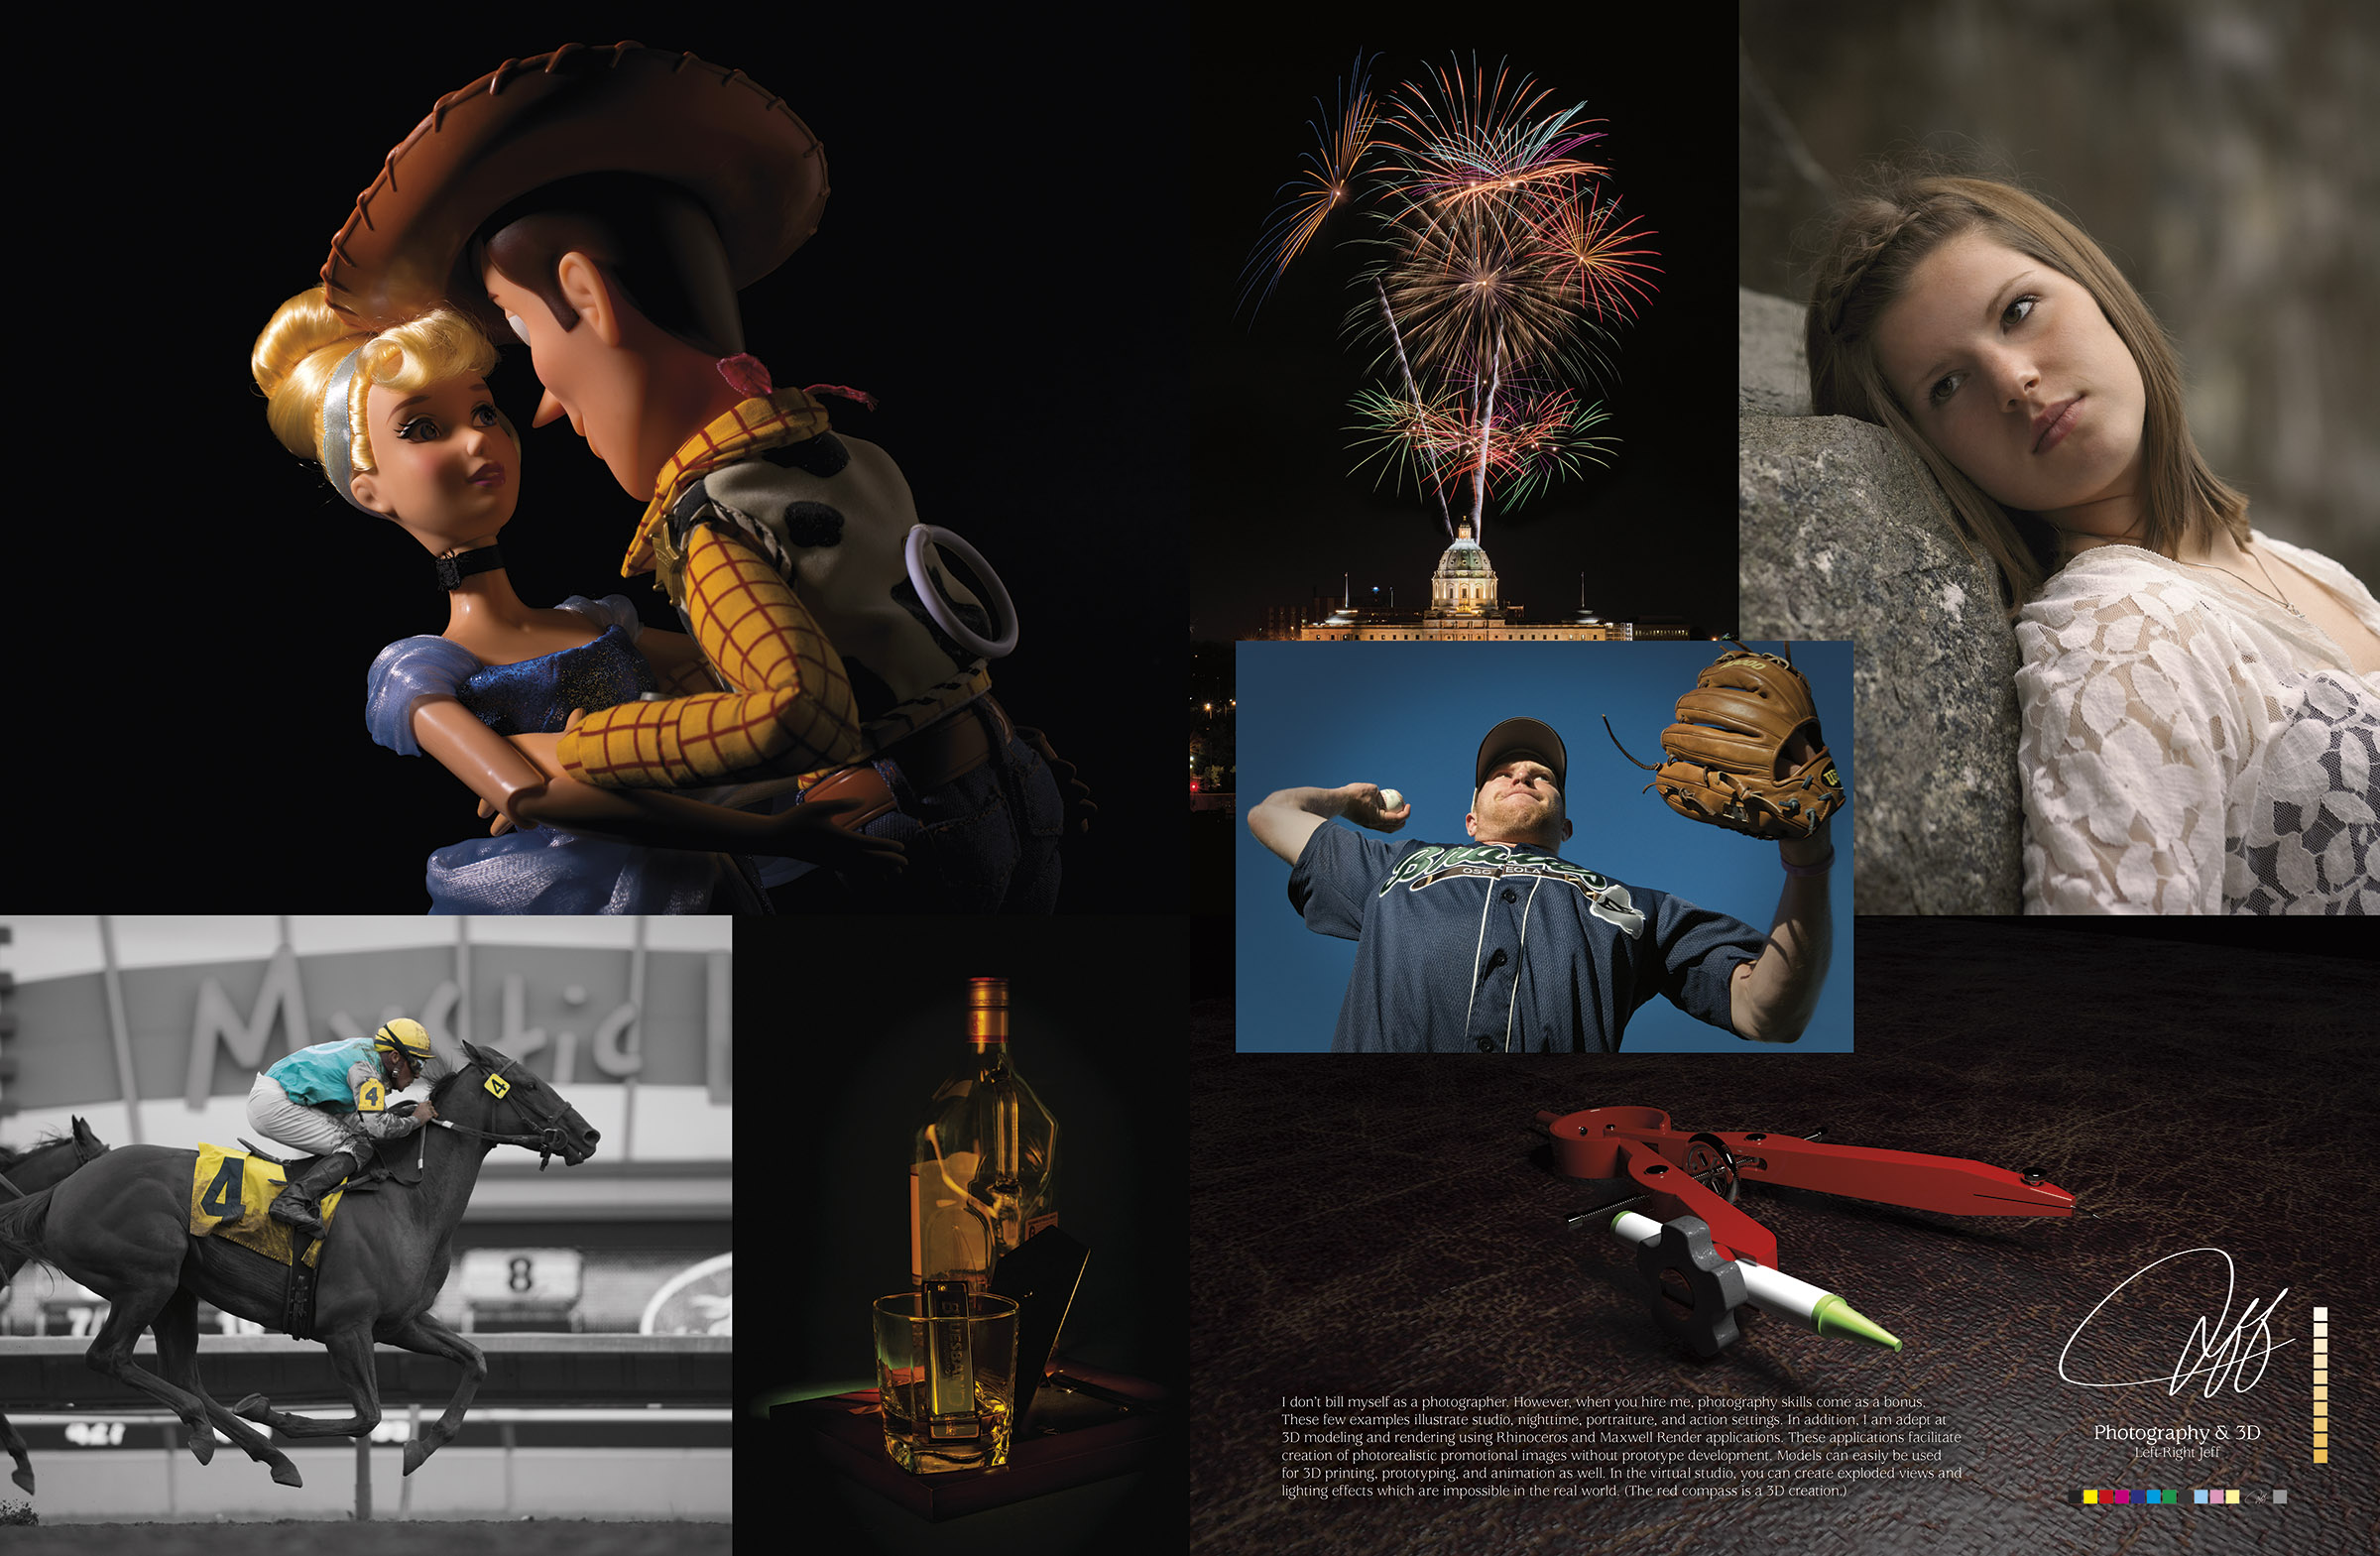 This is the Photography & 3D spread from Jeff Nelson’s portfolio.